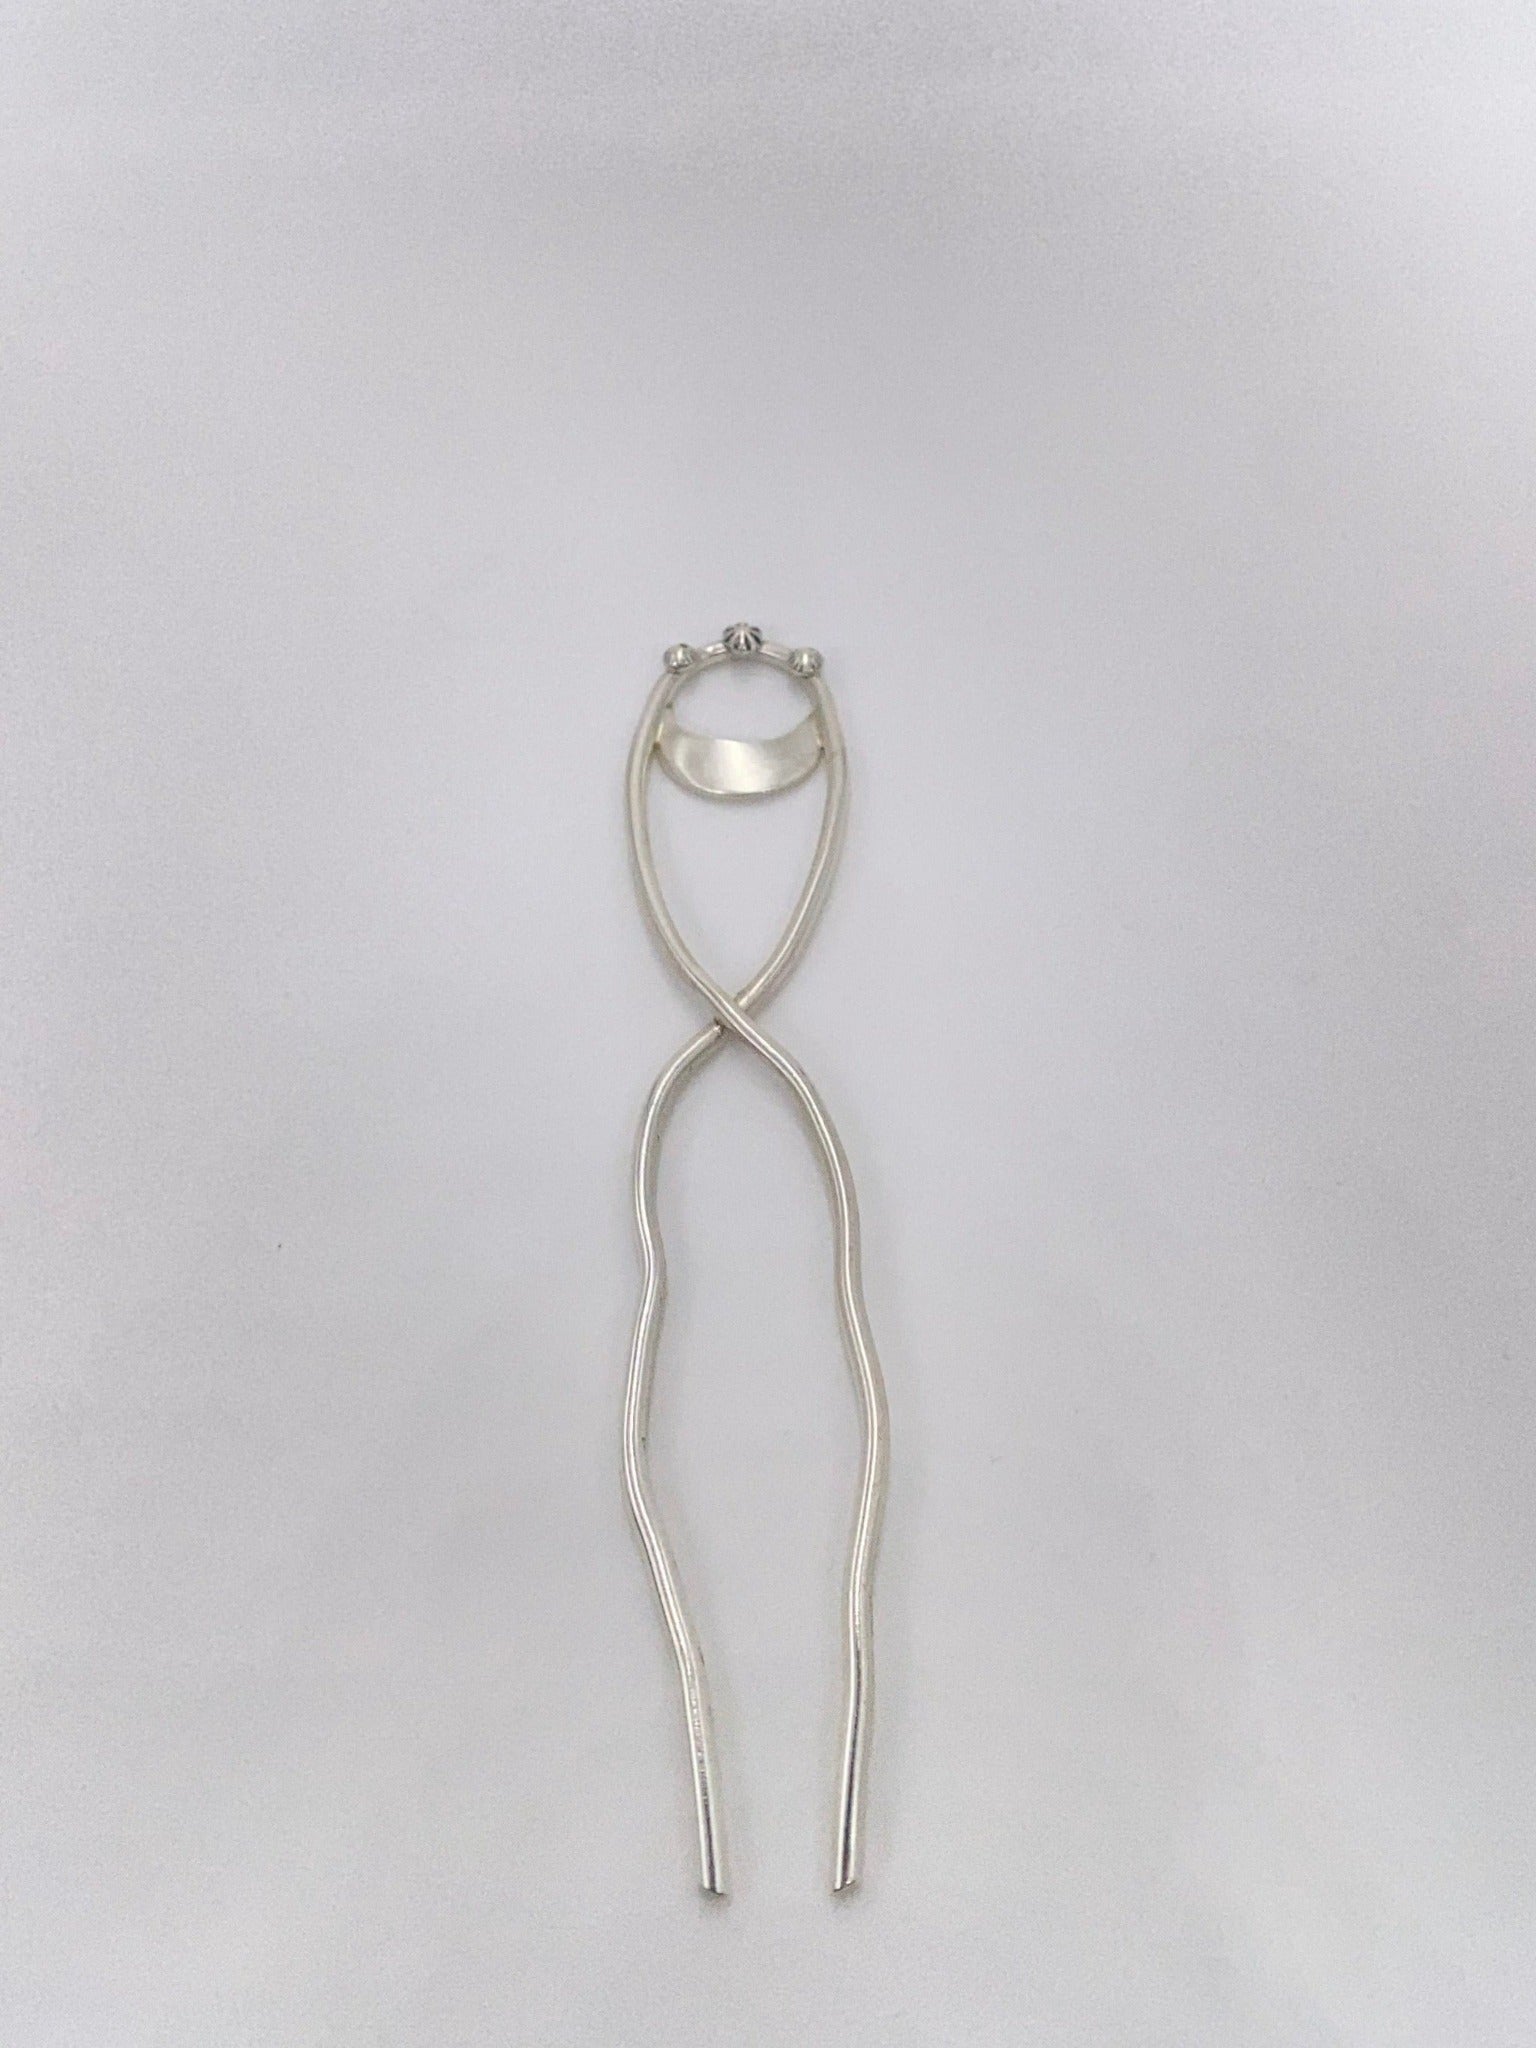 Vintage inspired hair fork with half moon & tiny bits of flower shaped granulation